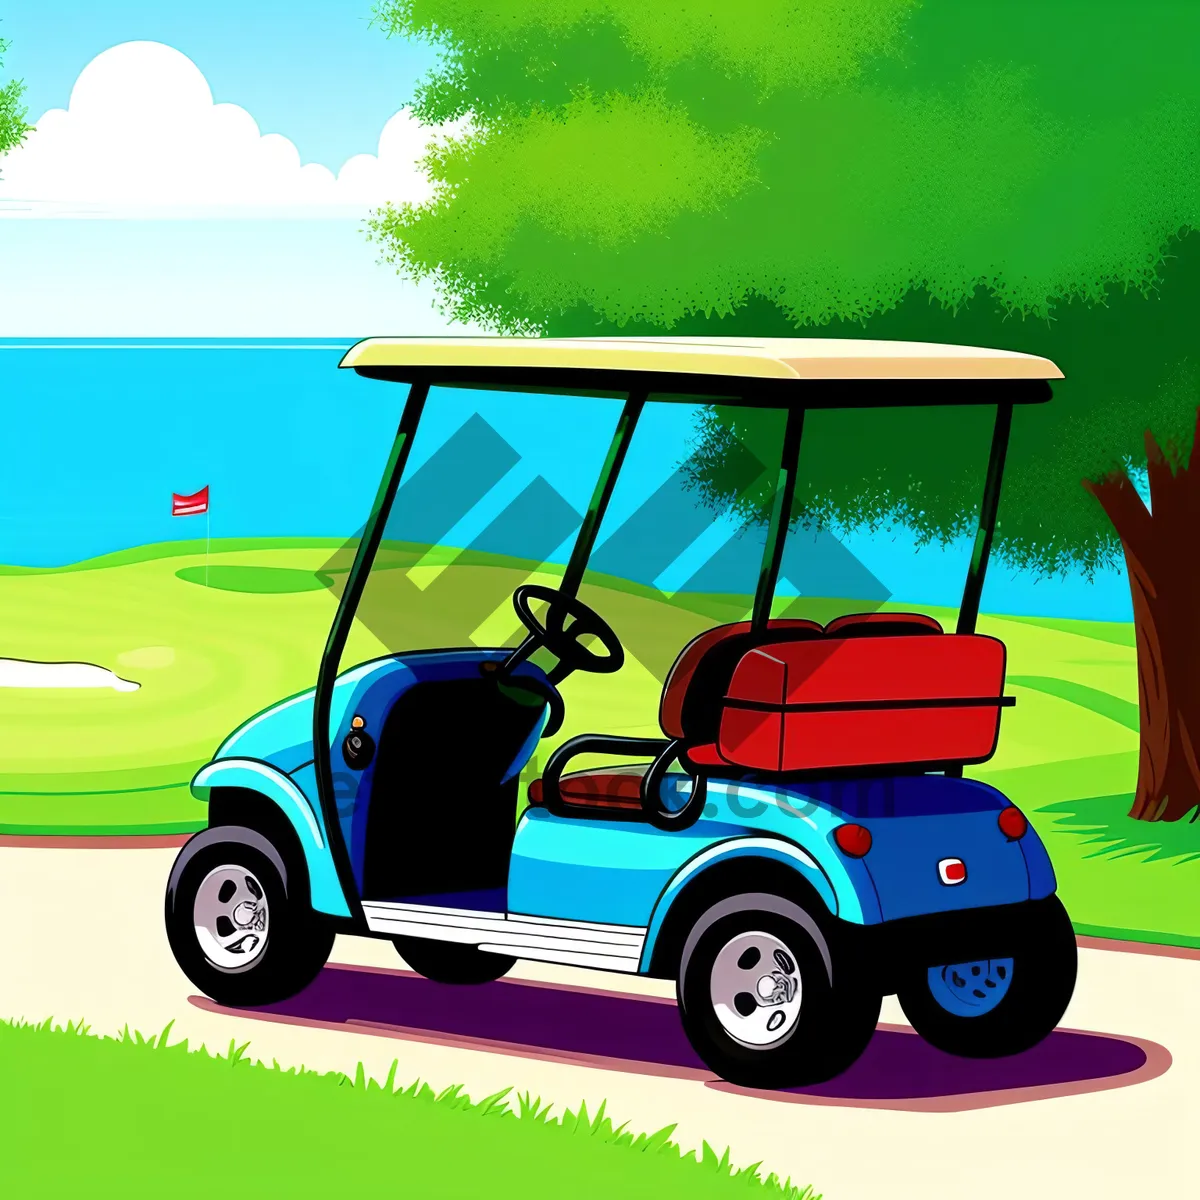 Picture of Golf Cart Speeding on the Course